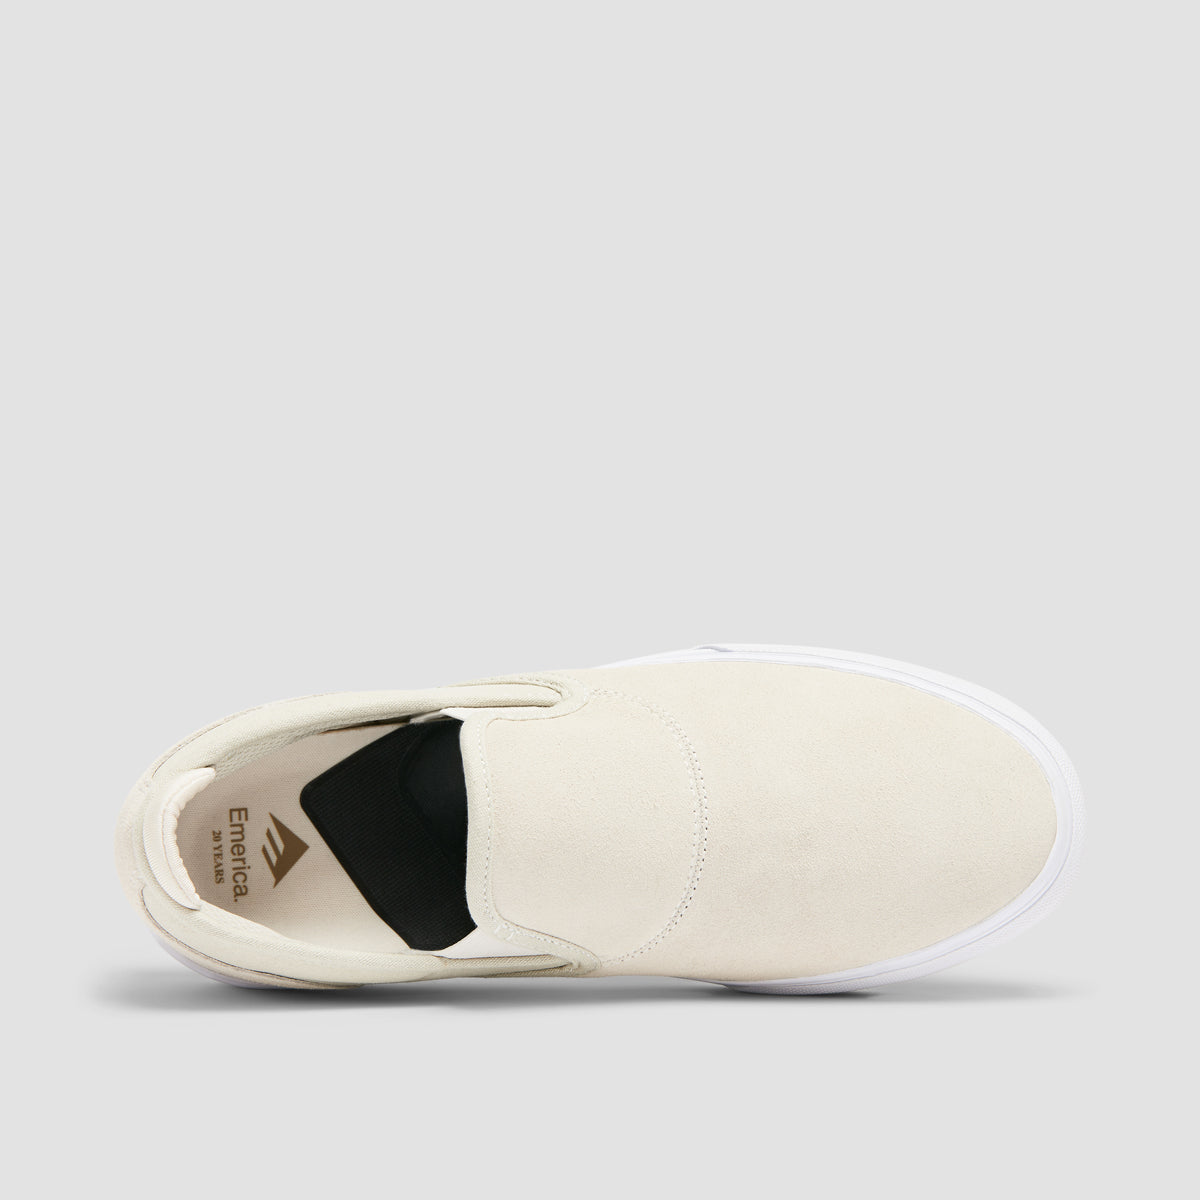 Emerica Wino G6 Slip-On X This Is Skateboarding Shoes - White